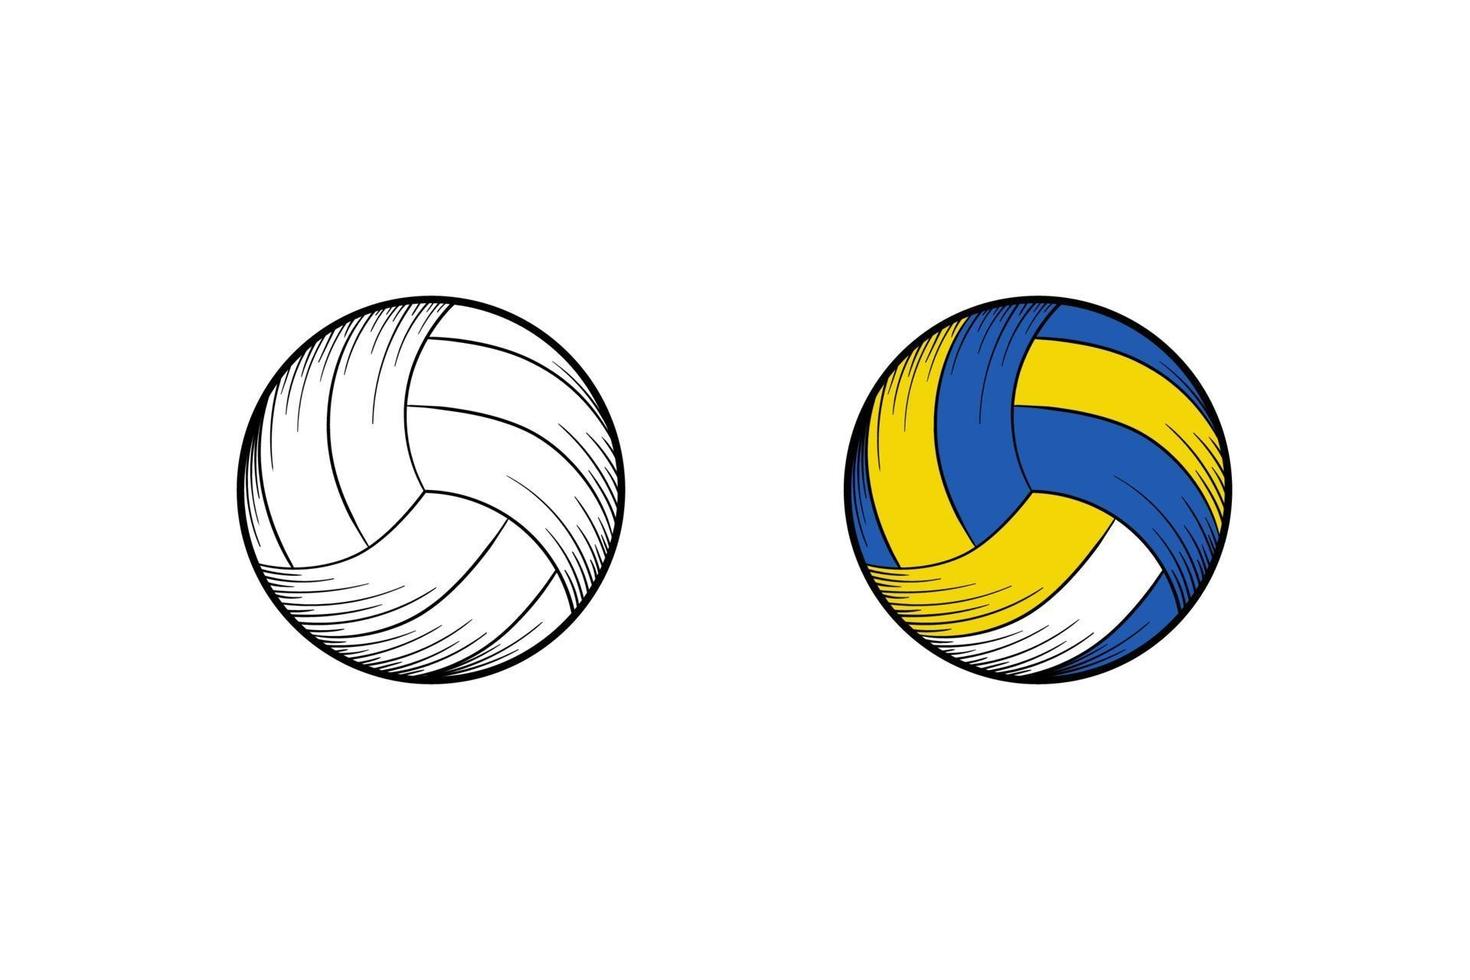 Volleyball hand drawn illustration sketch and color vector